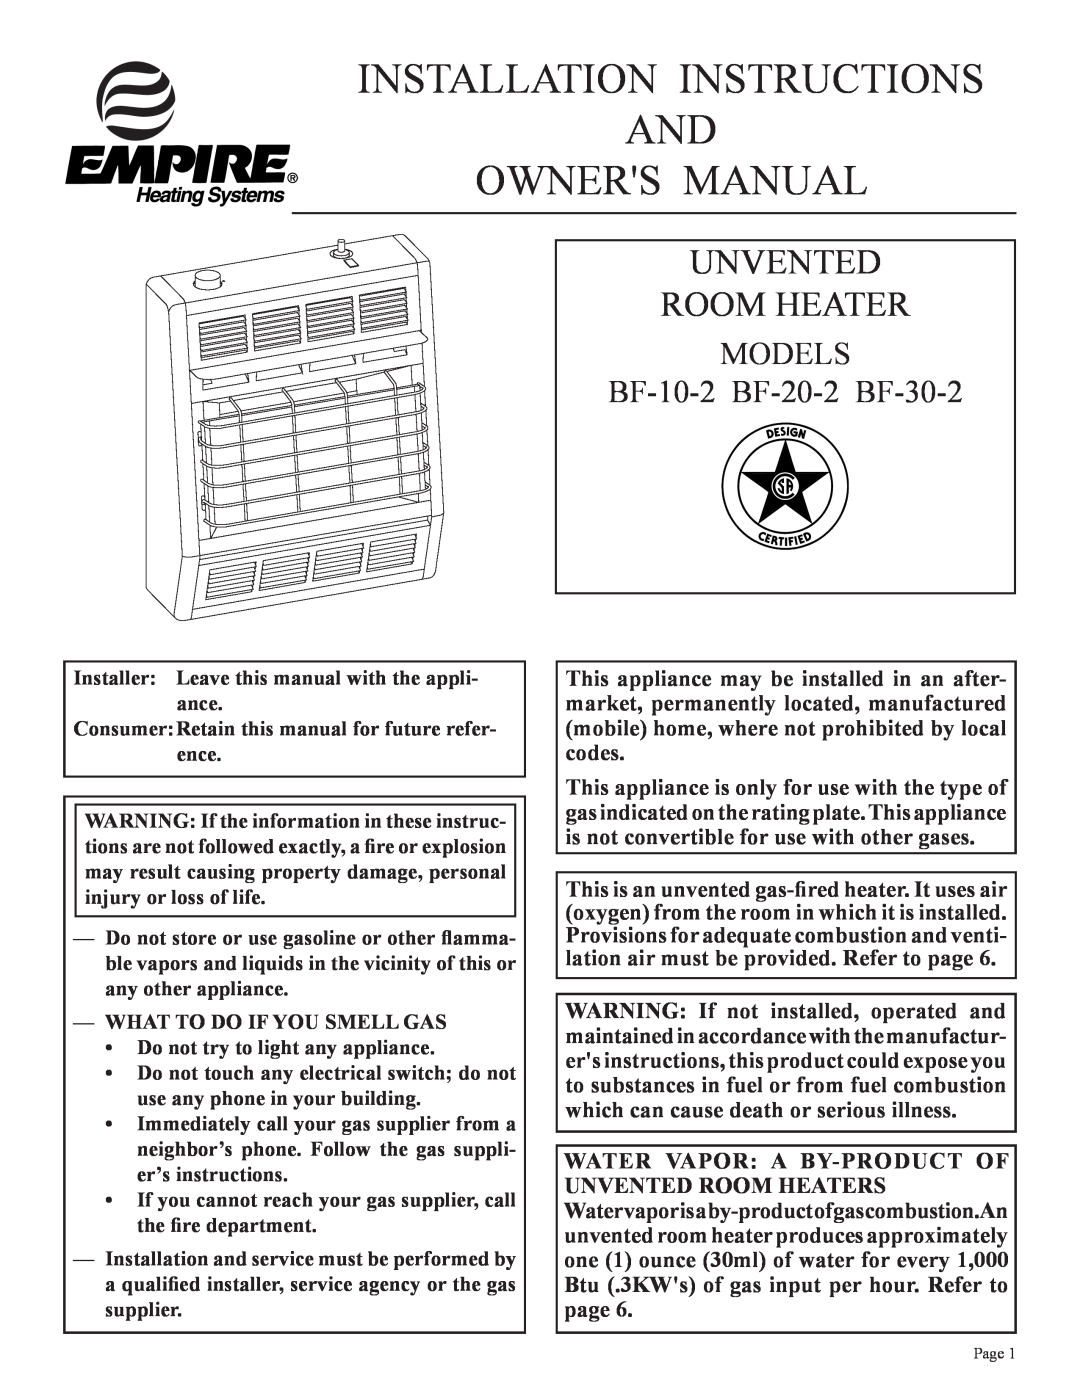 Empire Comfort Systems installation instructions MODELS BF-10-2 BF-20-2 BF-30-2 EFFECTIVE DATE, August 